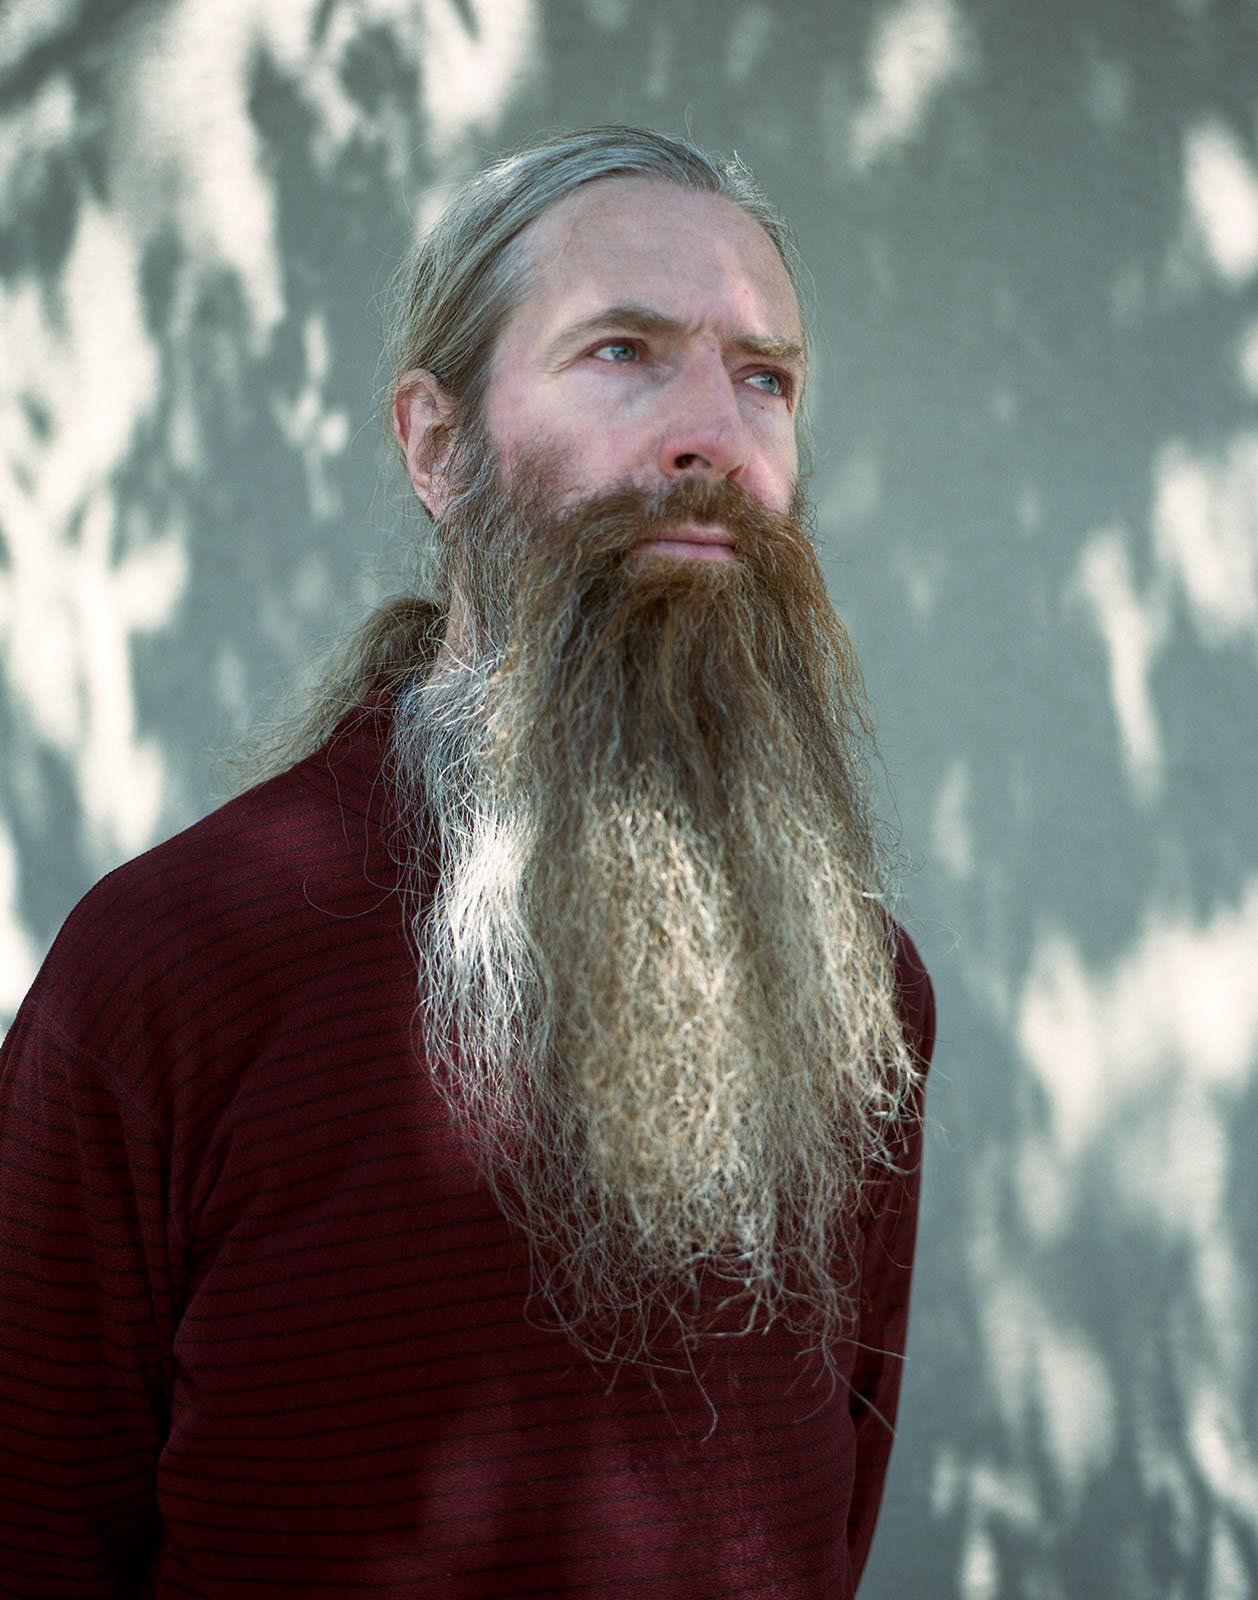  Aubrey De Grey, Chief Science Officer at SENS Research Foundation and RAADFest key speaker. Aubrey believes medical technology will one day allow humans to control the aging process and live healthily for potentially hundreds of years.   